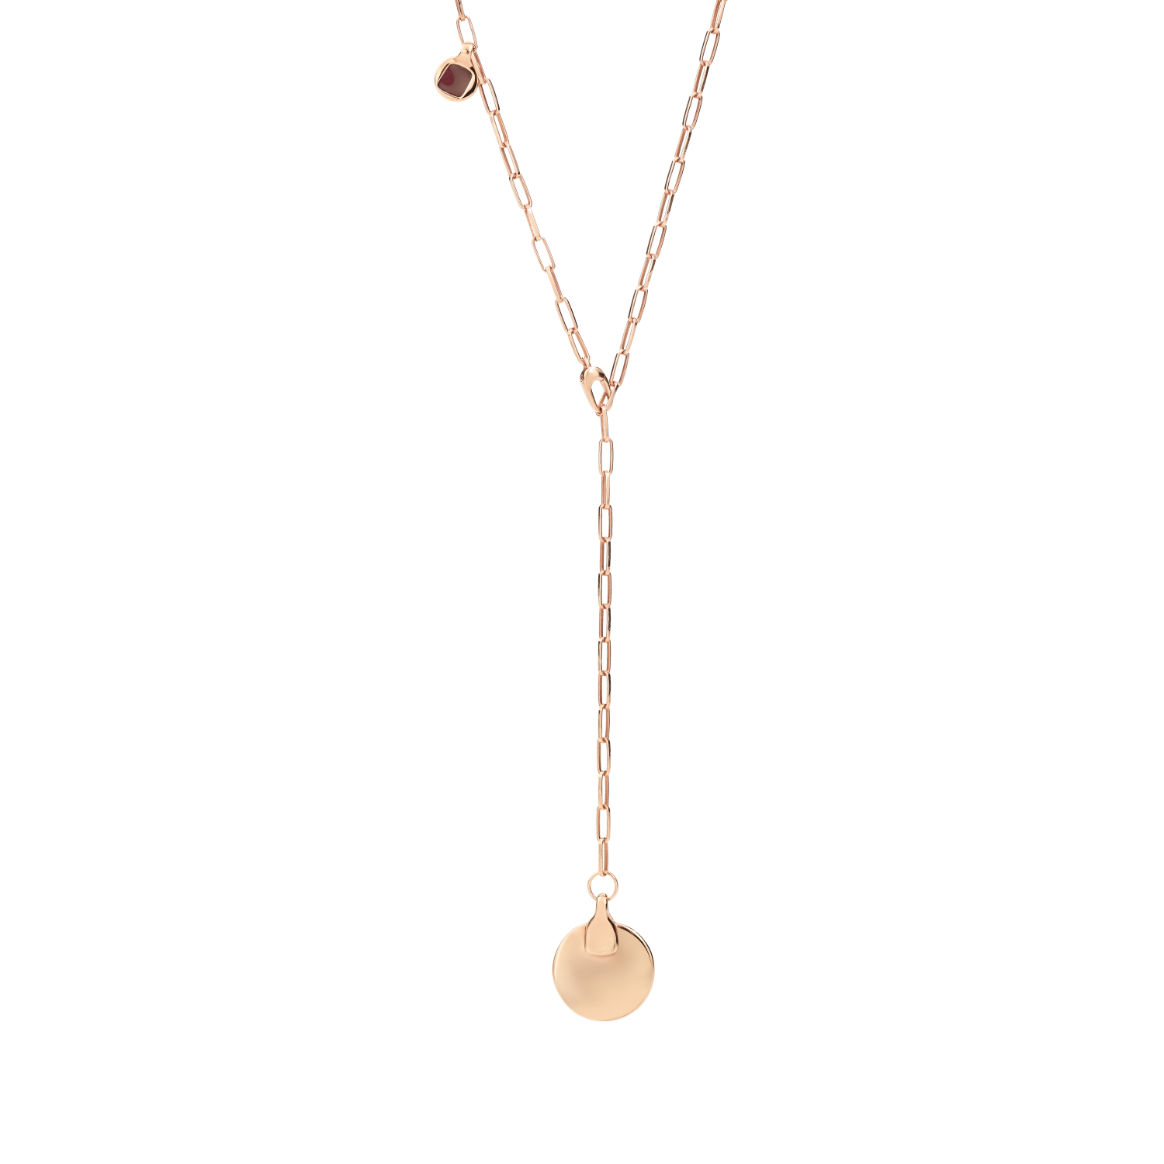 DCC1011_BAZAA_EXRAG_010_Dodo_bazaar-lariat-necklace-18k-rose-gold-plated-silver-enamel.png